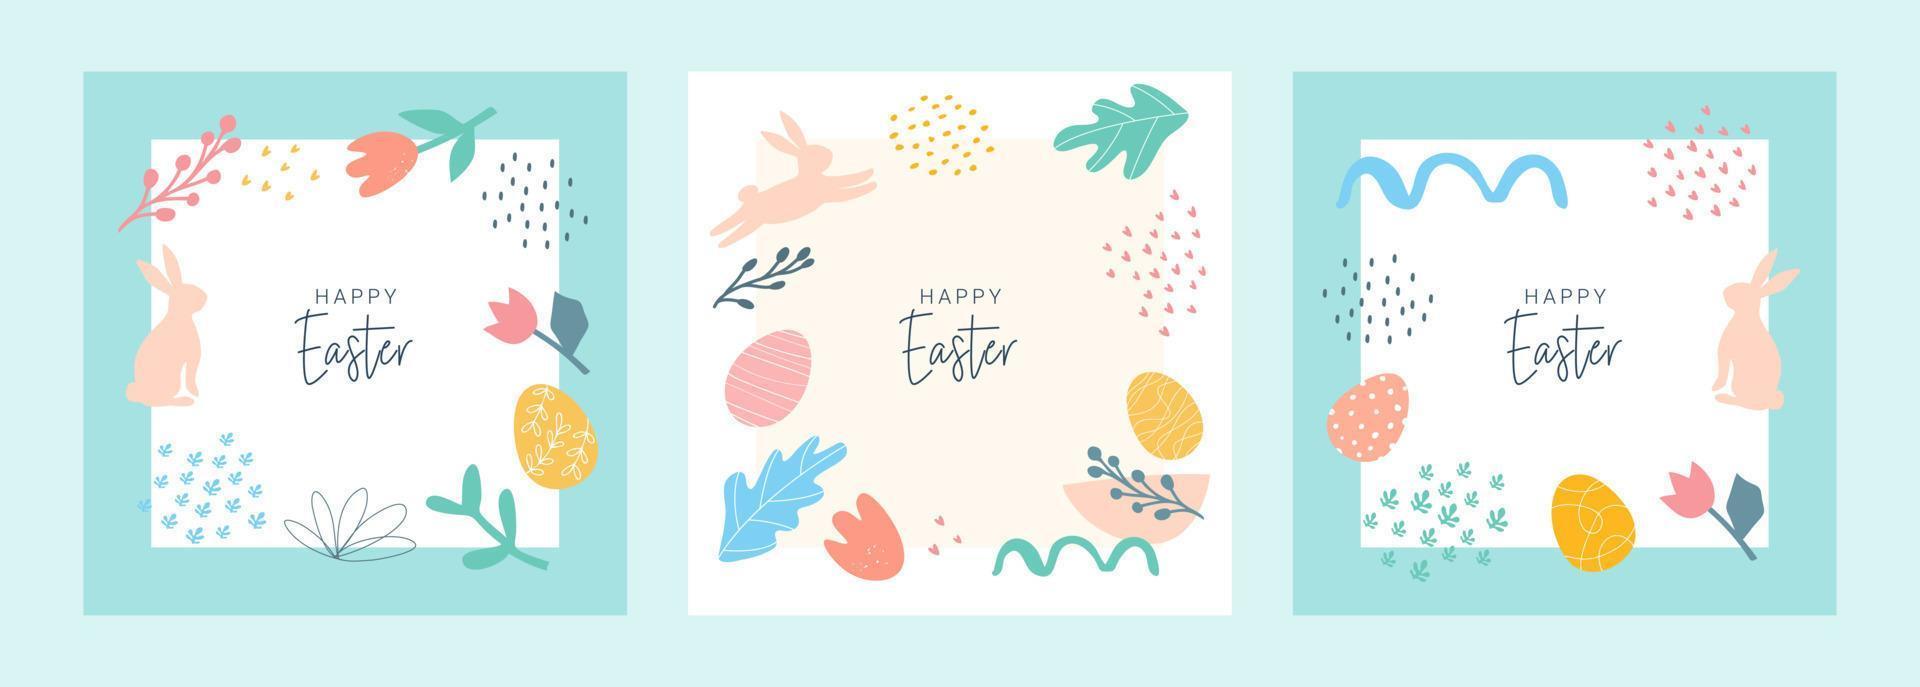 Happy Easter. Set of banners, greeting cards, posters, holiday covers. Modern abstract design with typography, doodles, eggs and bunny, organic nature shapes. Trendy minimalist style. vector